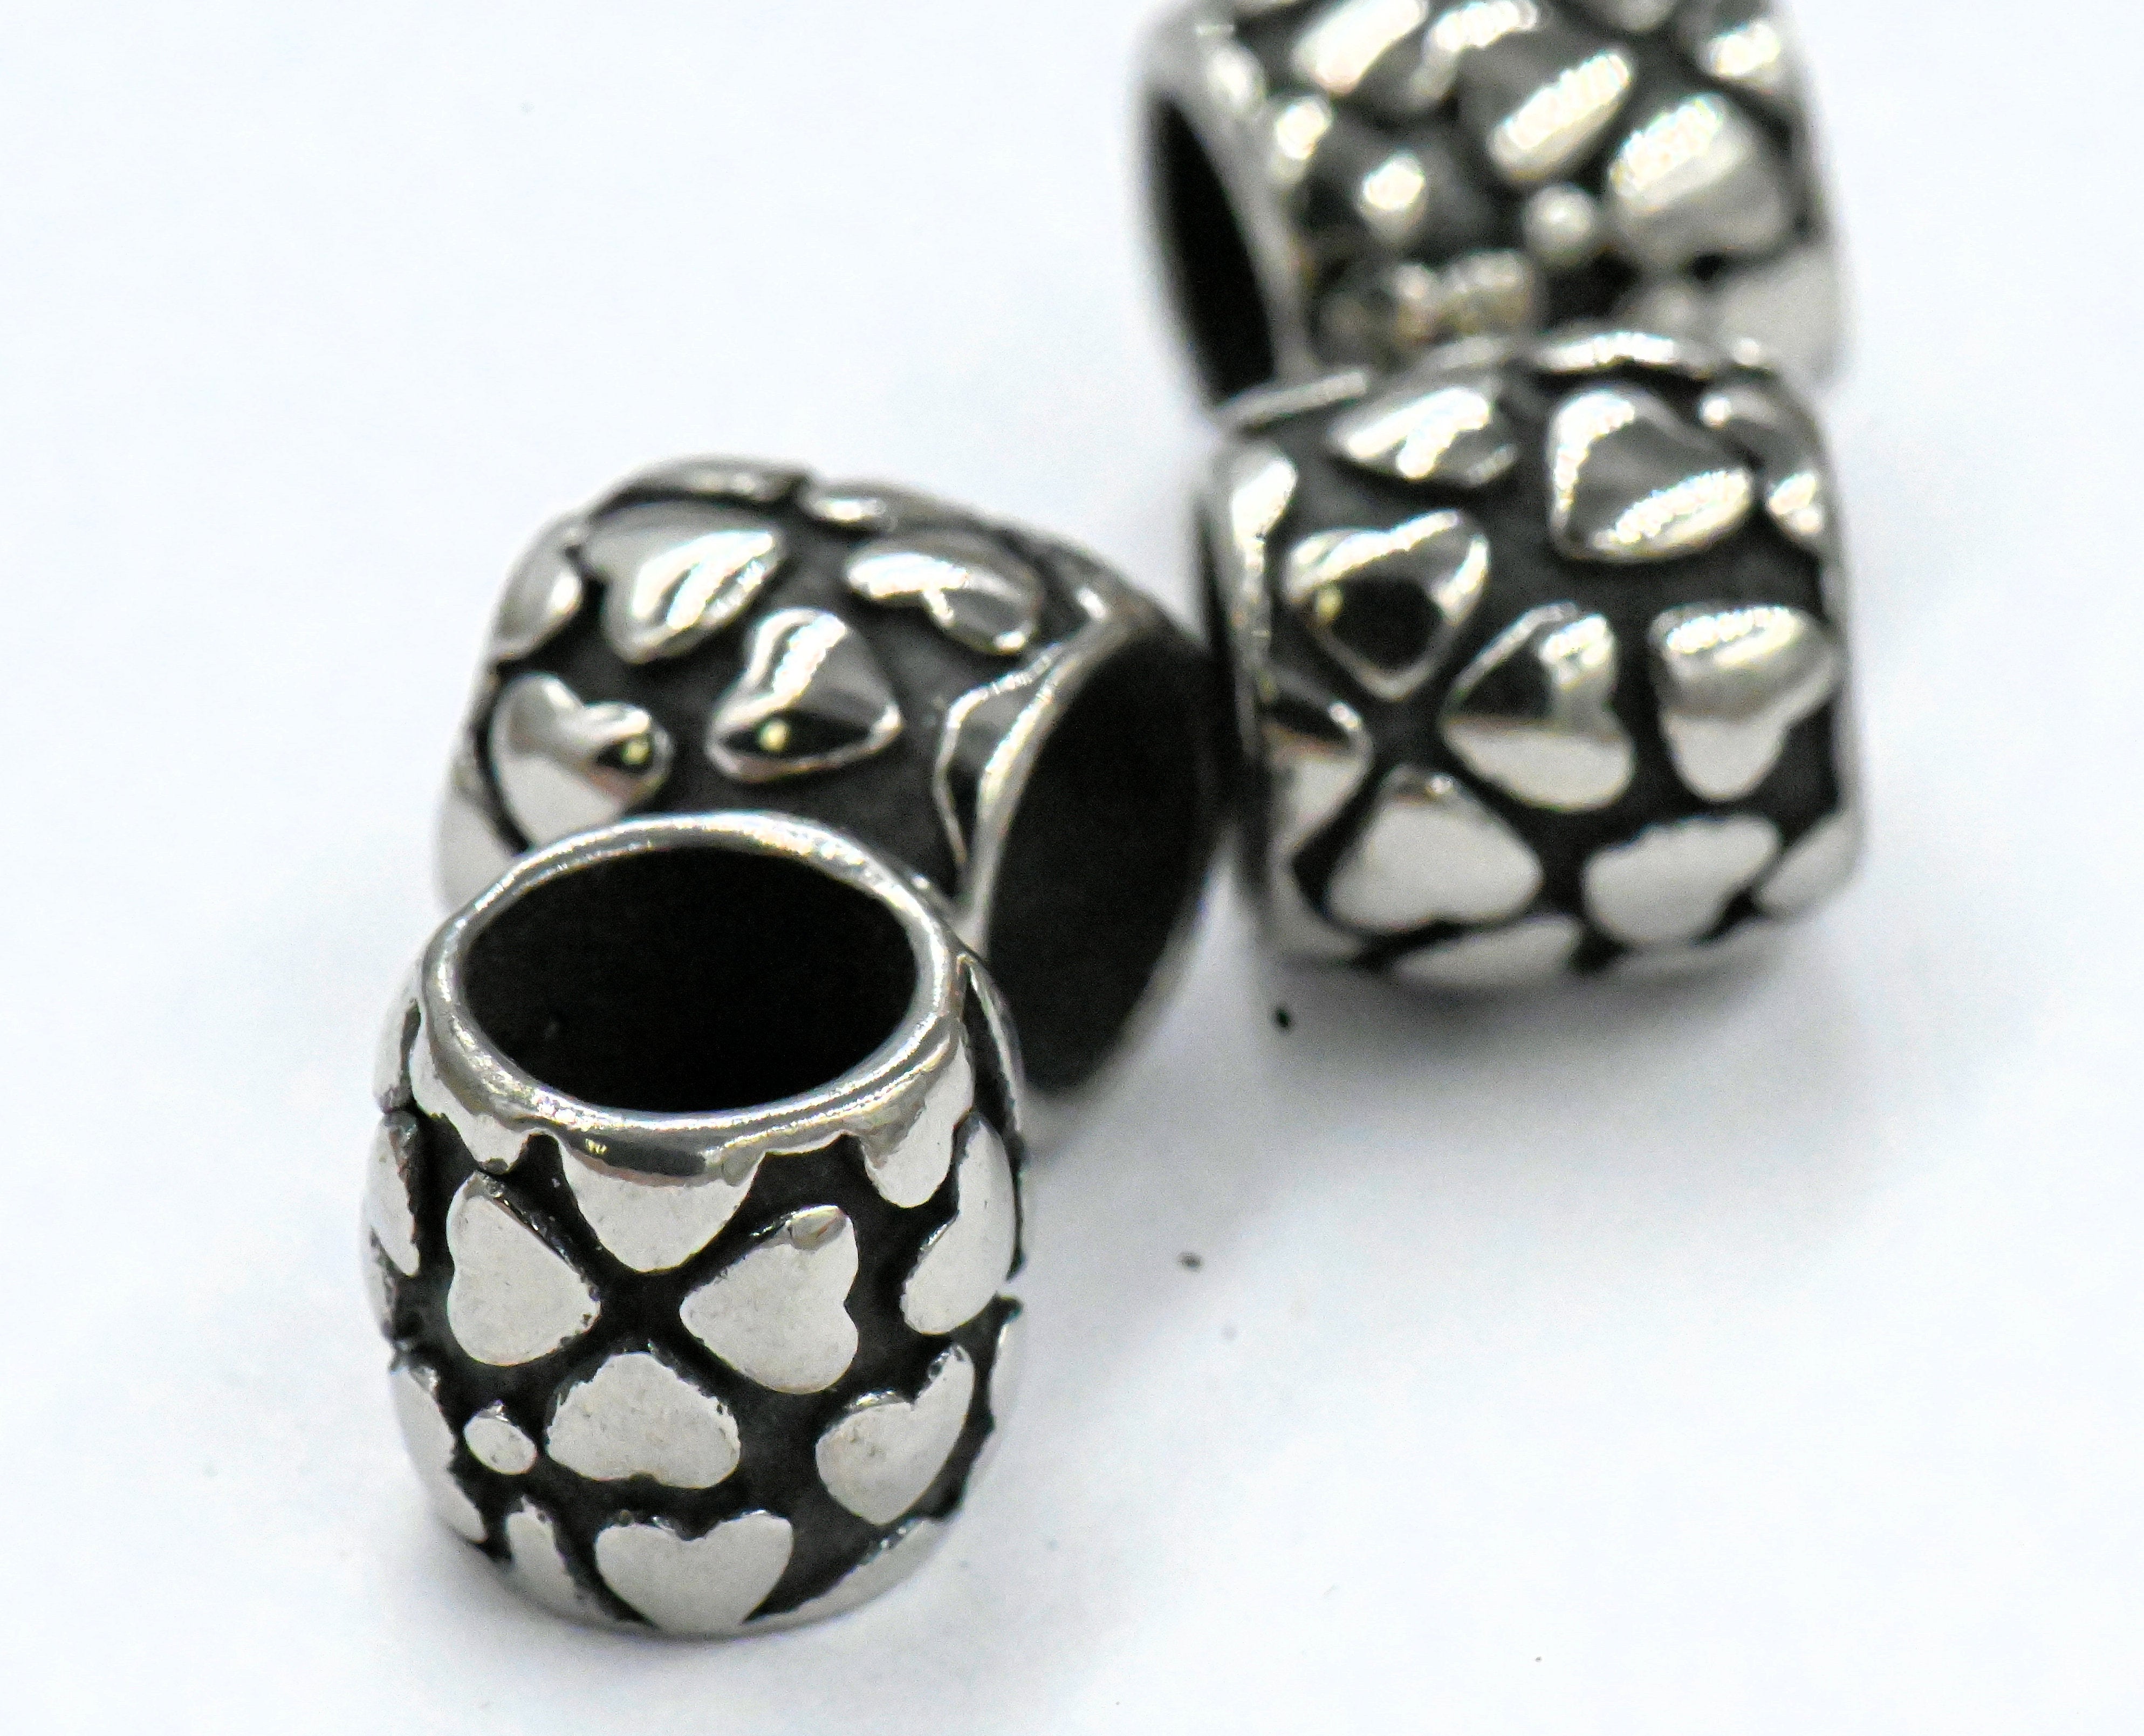 Stainless Steel Spacer Beads, Large Hole Beads, 2pc Heart Column, Antique Silver